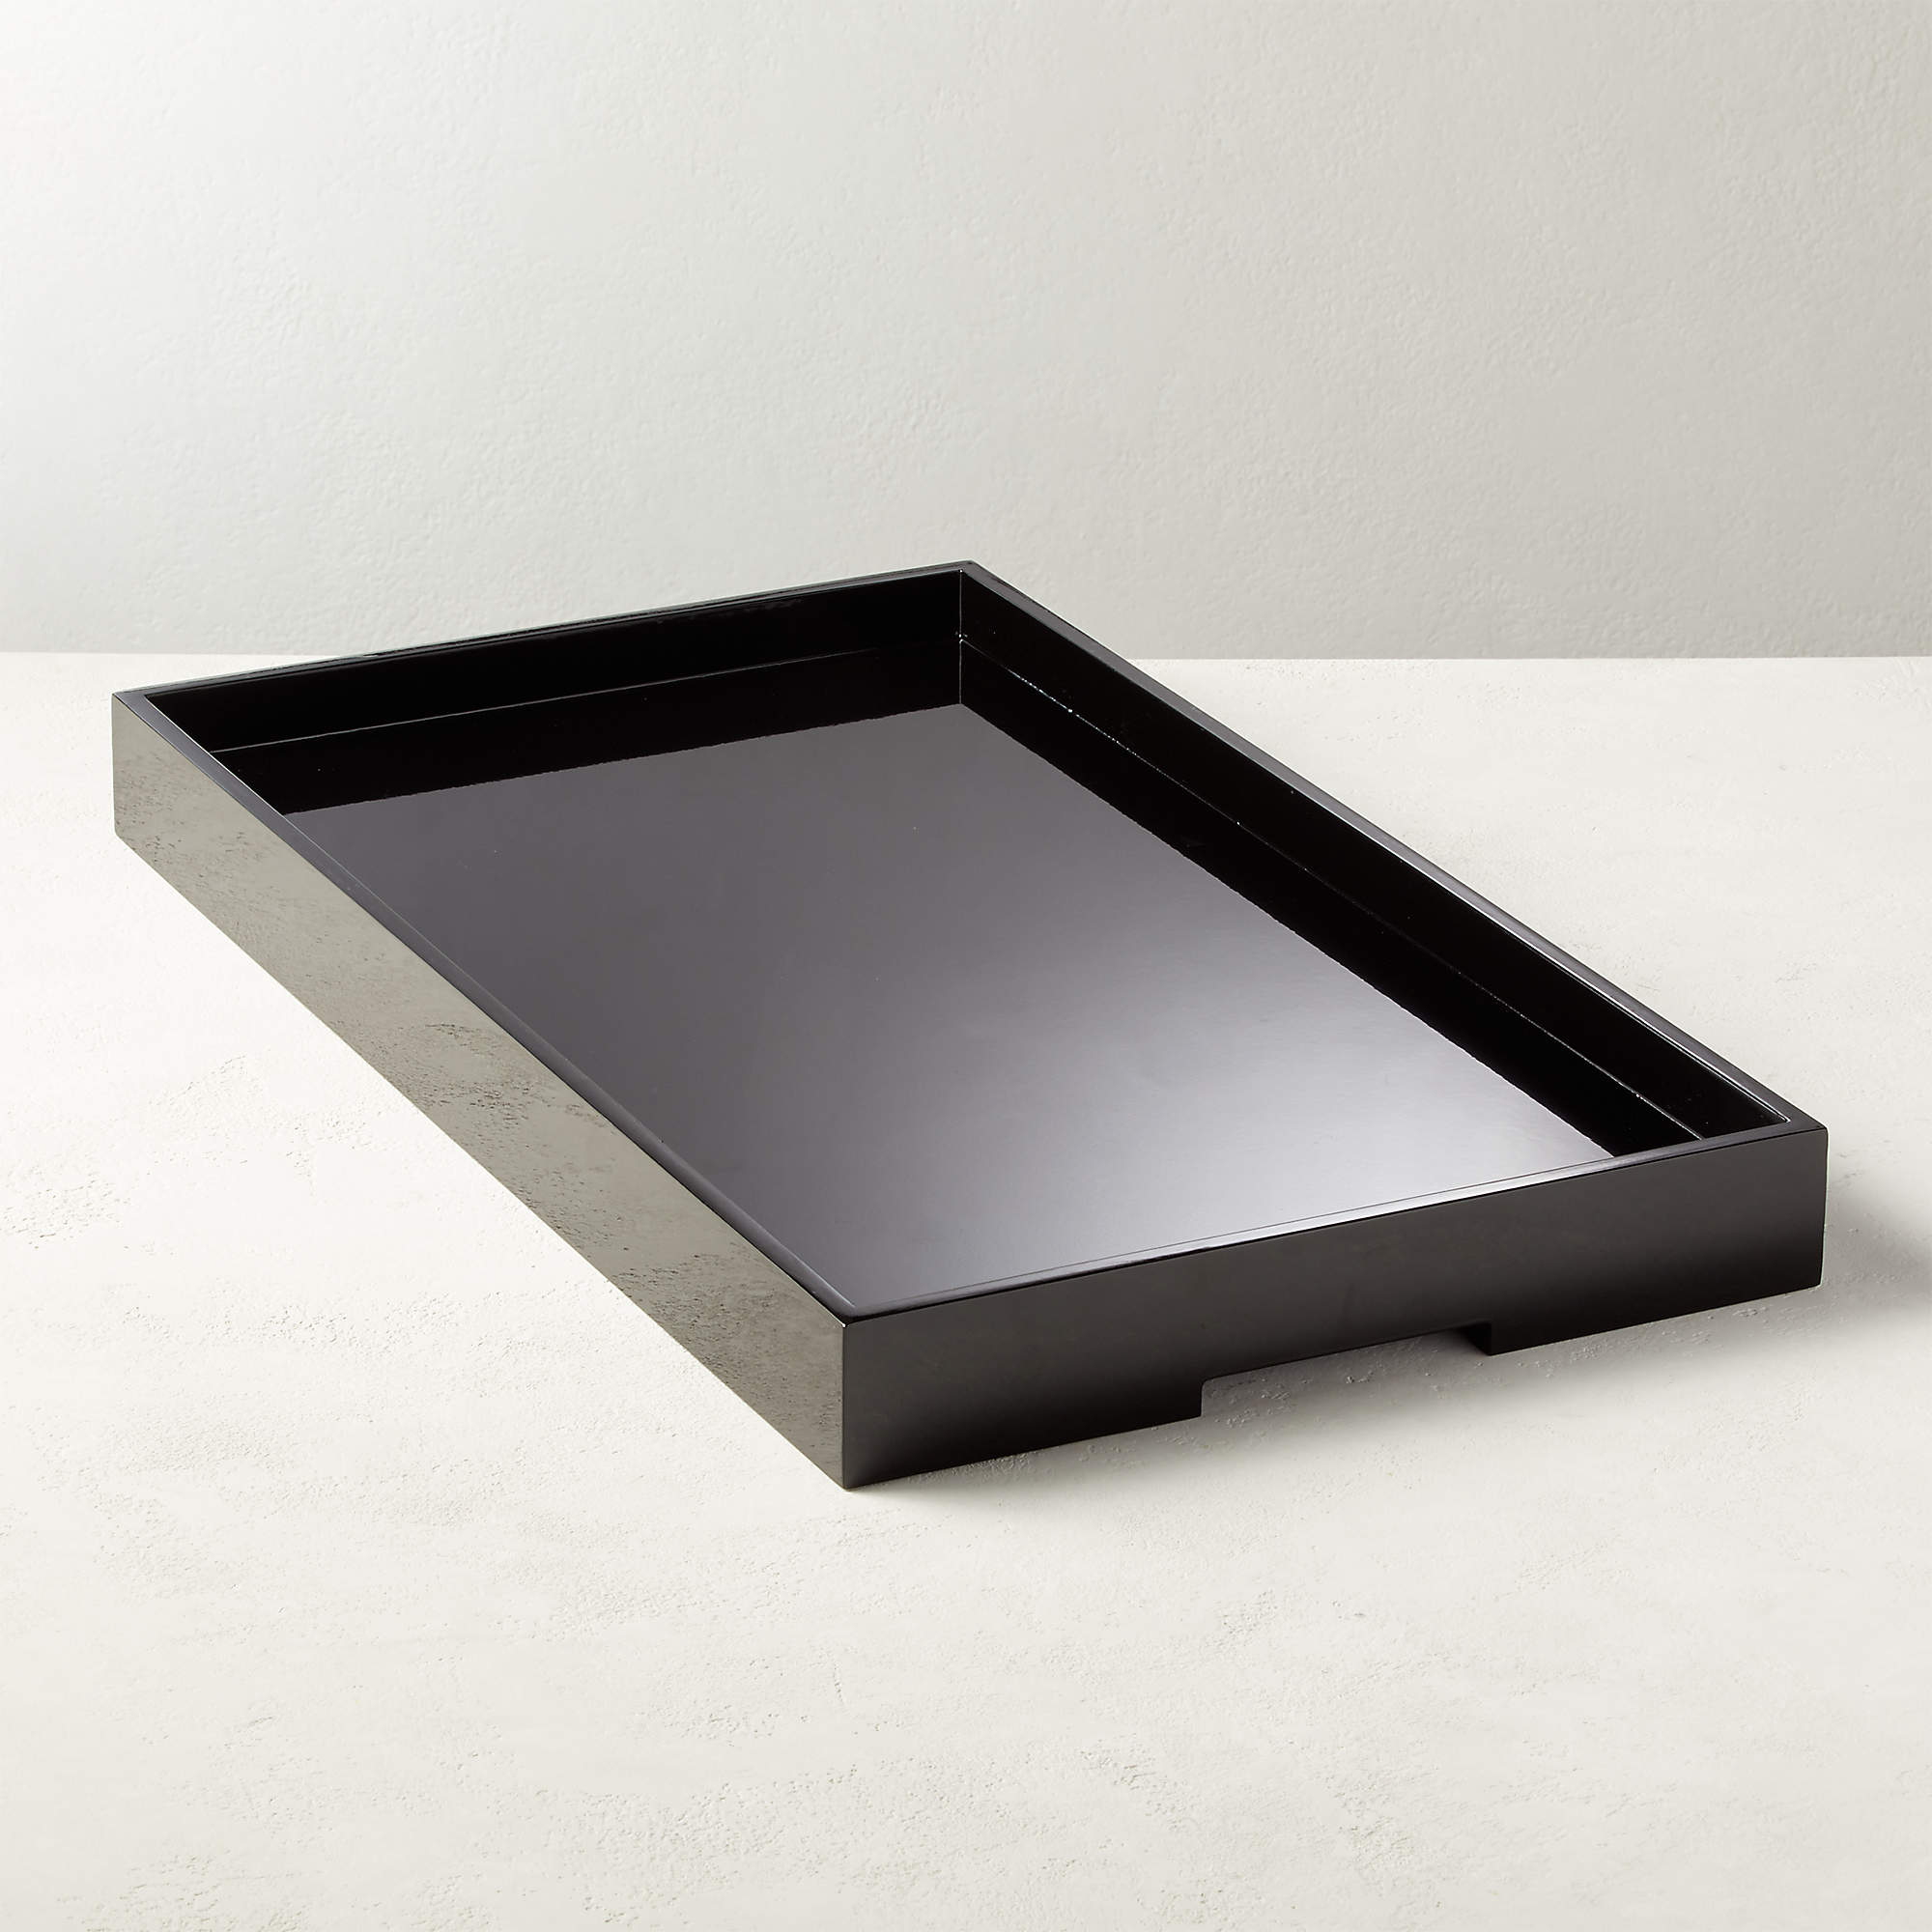 Shop High Gloss Black Rectangle Tray from CB2 on Openhaus